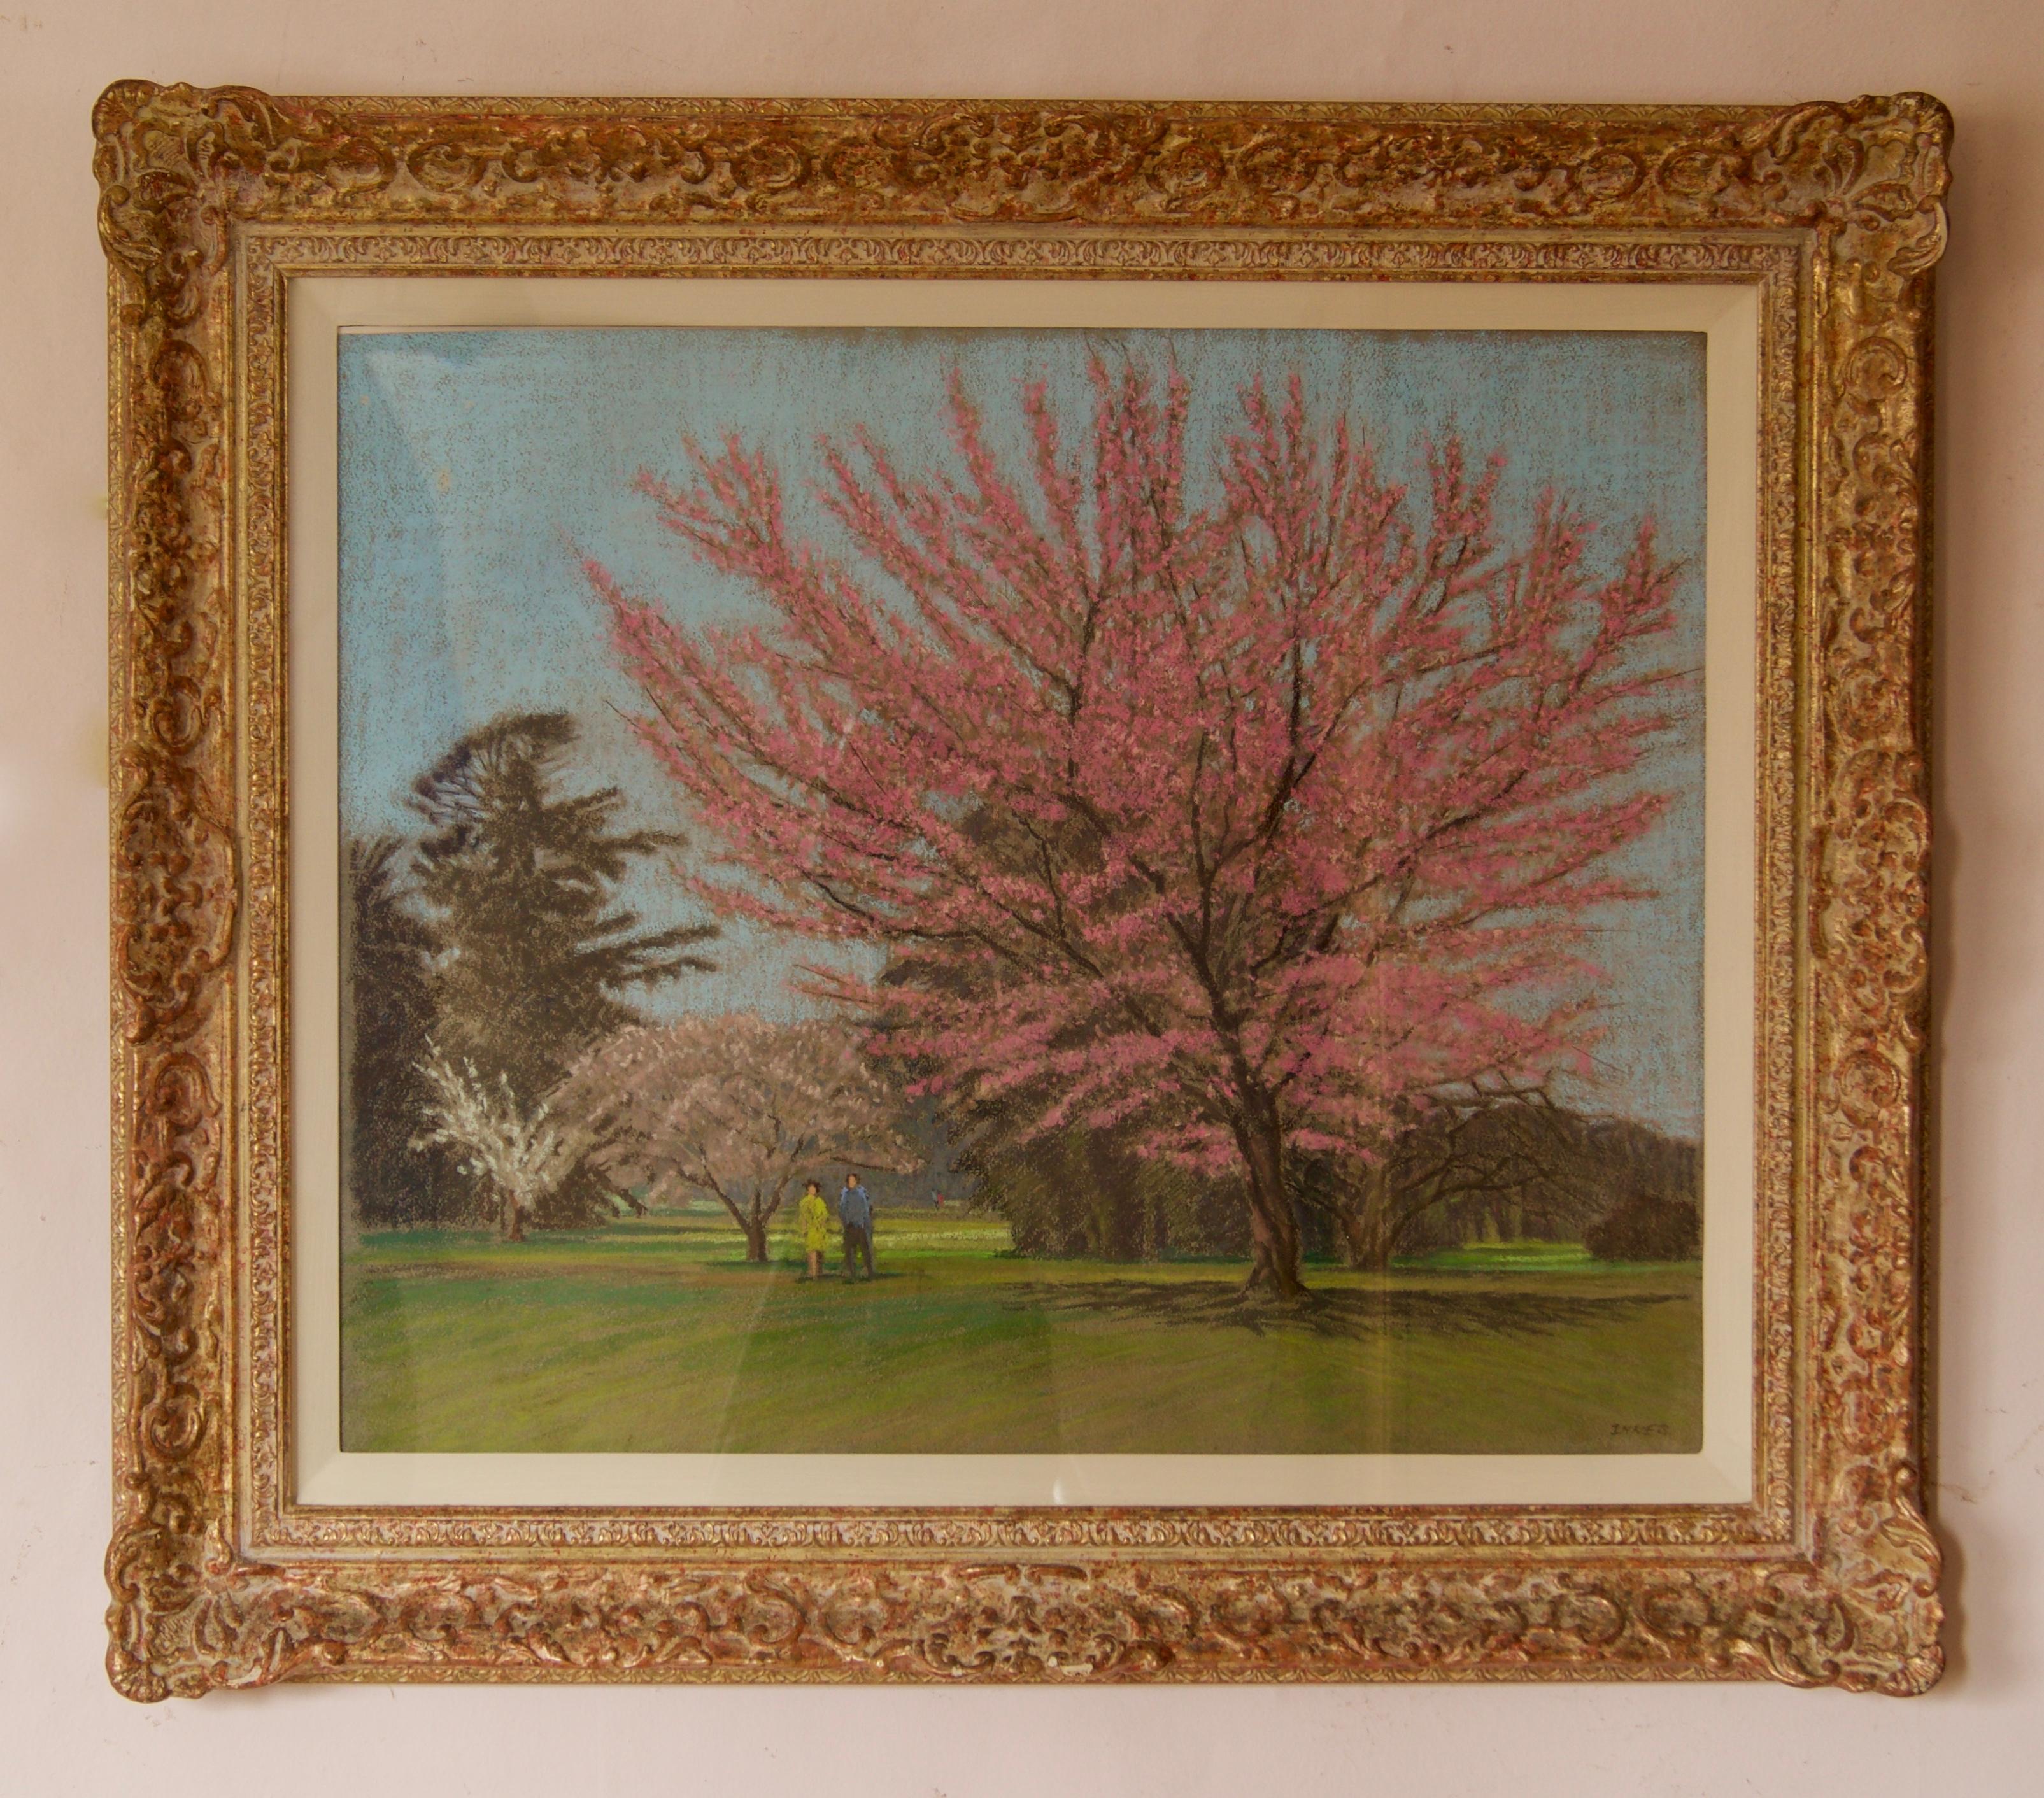 Apple Blossom Tree Park - Mid 20th Century Impressionist Landscape Oil by Innes - Painting by William Henry Innes